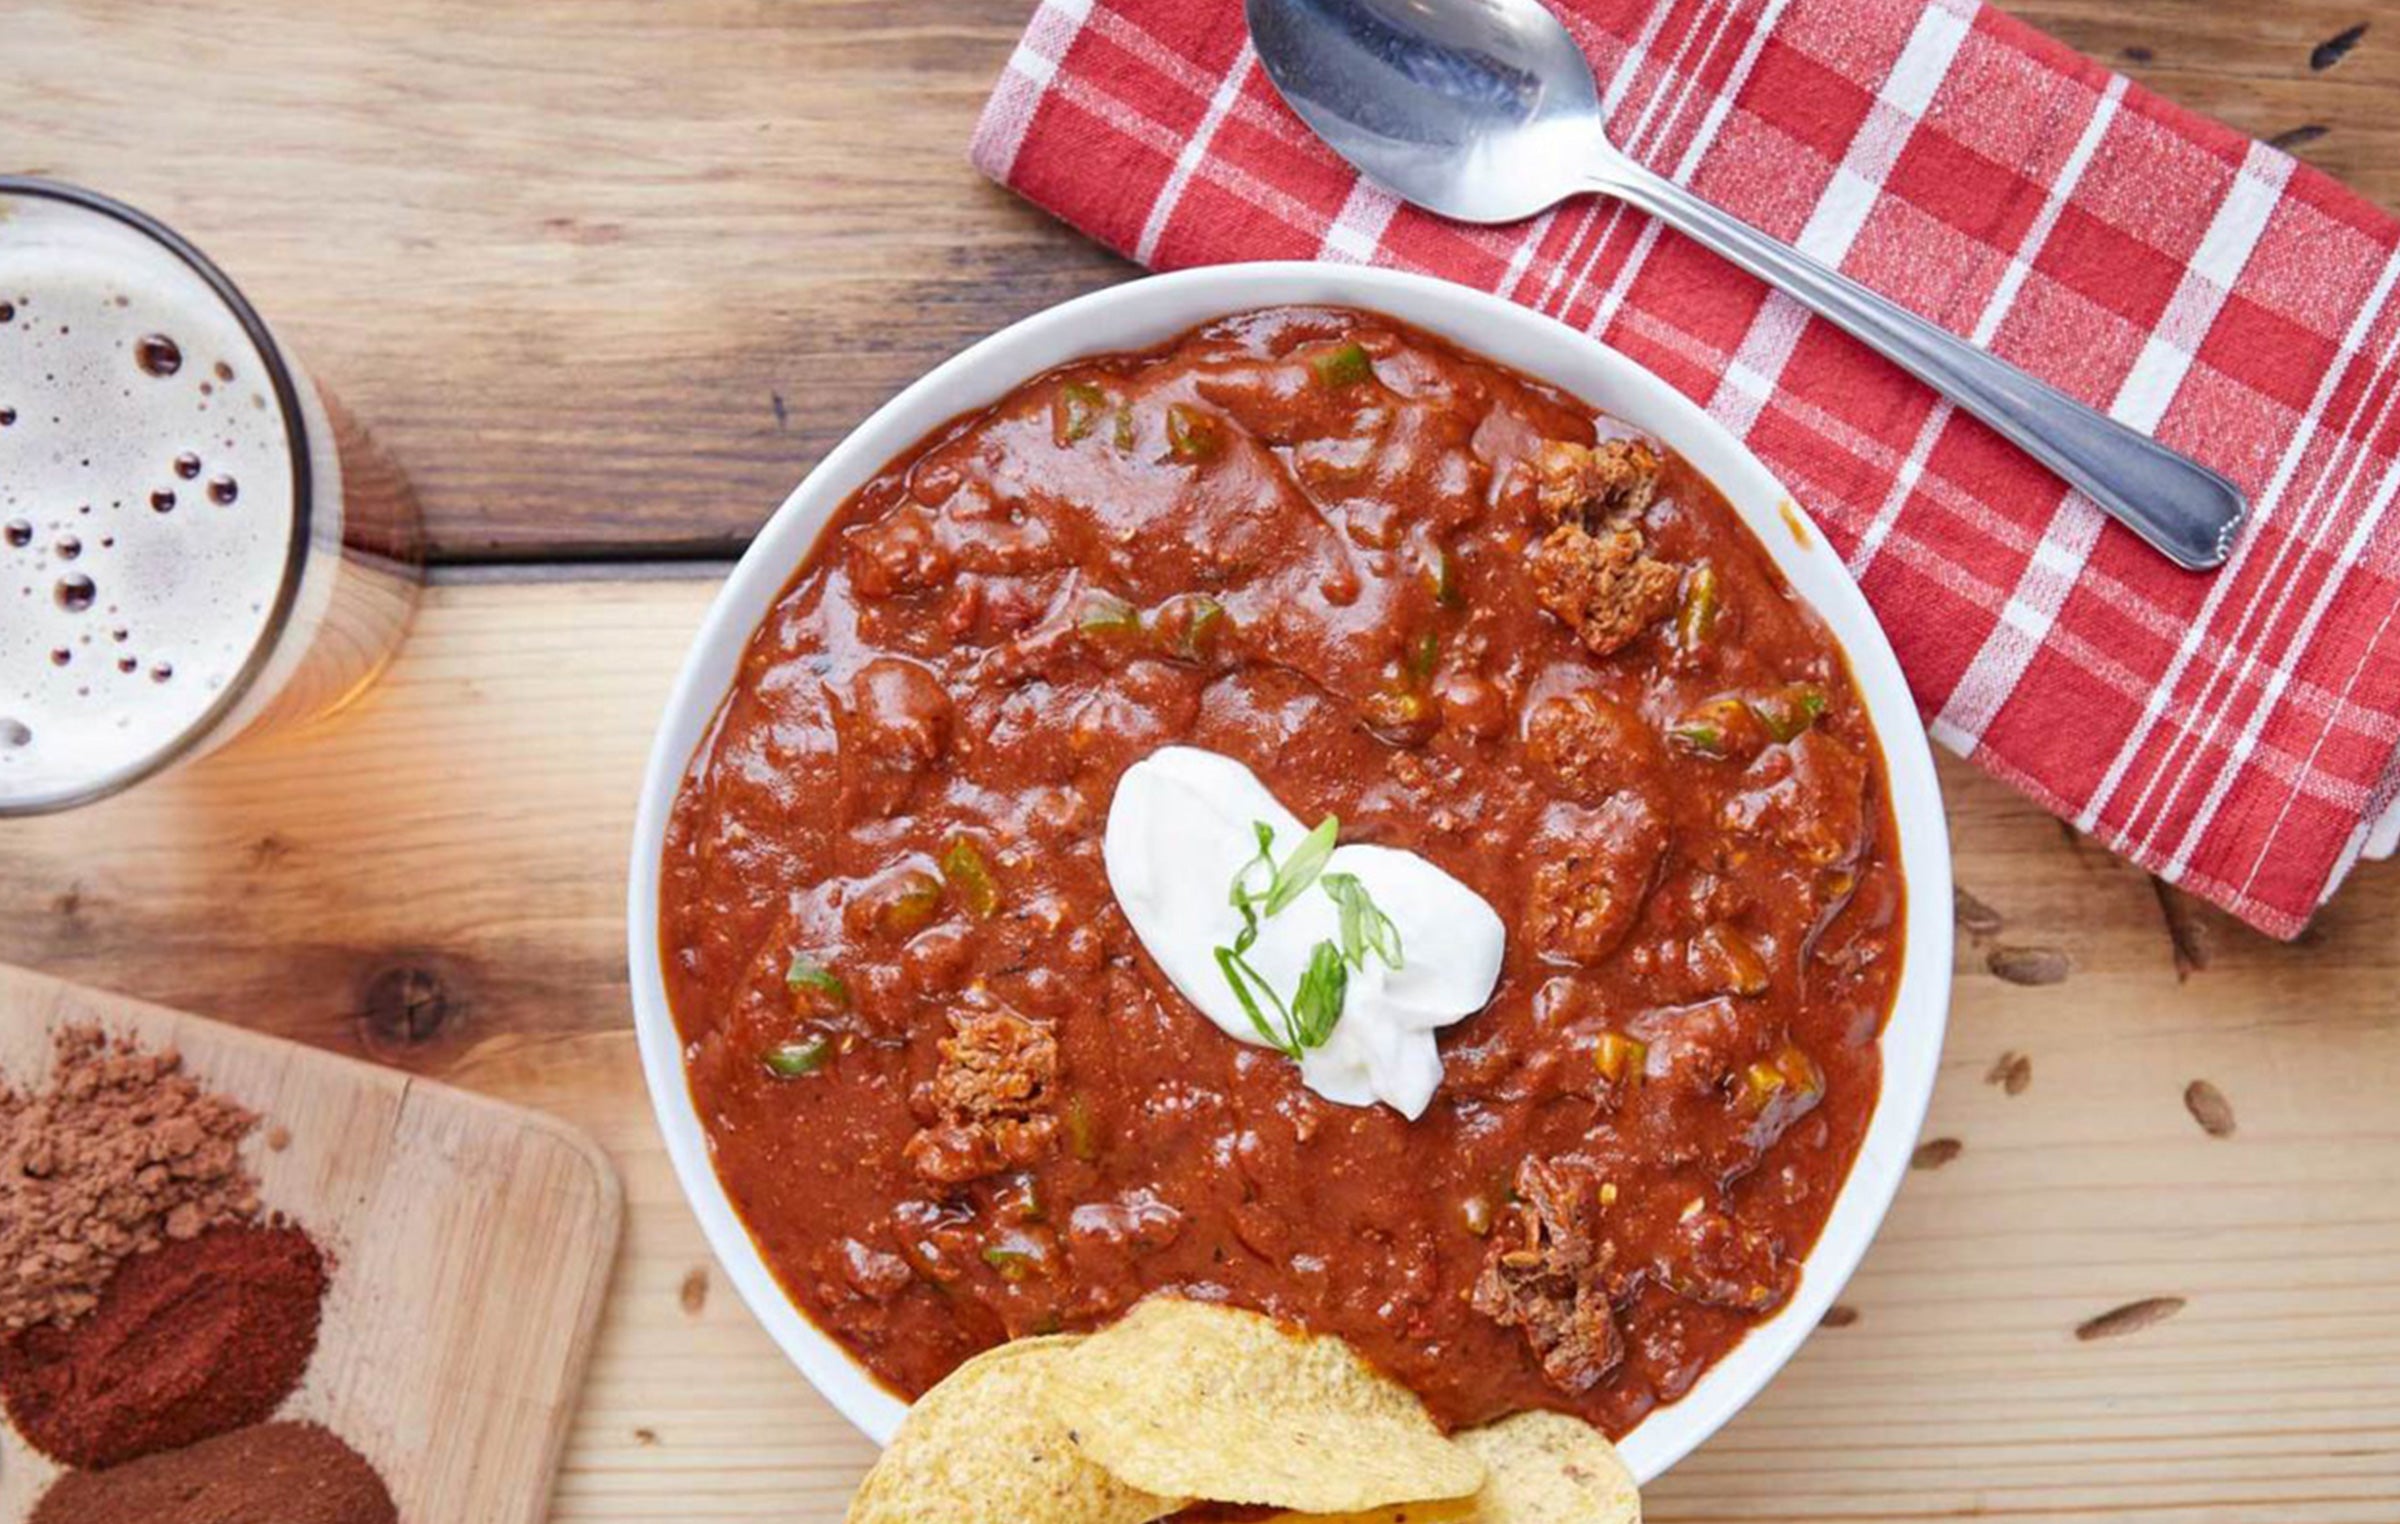 Recipe of the Month: Texas Chili